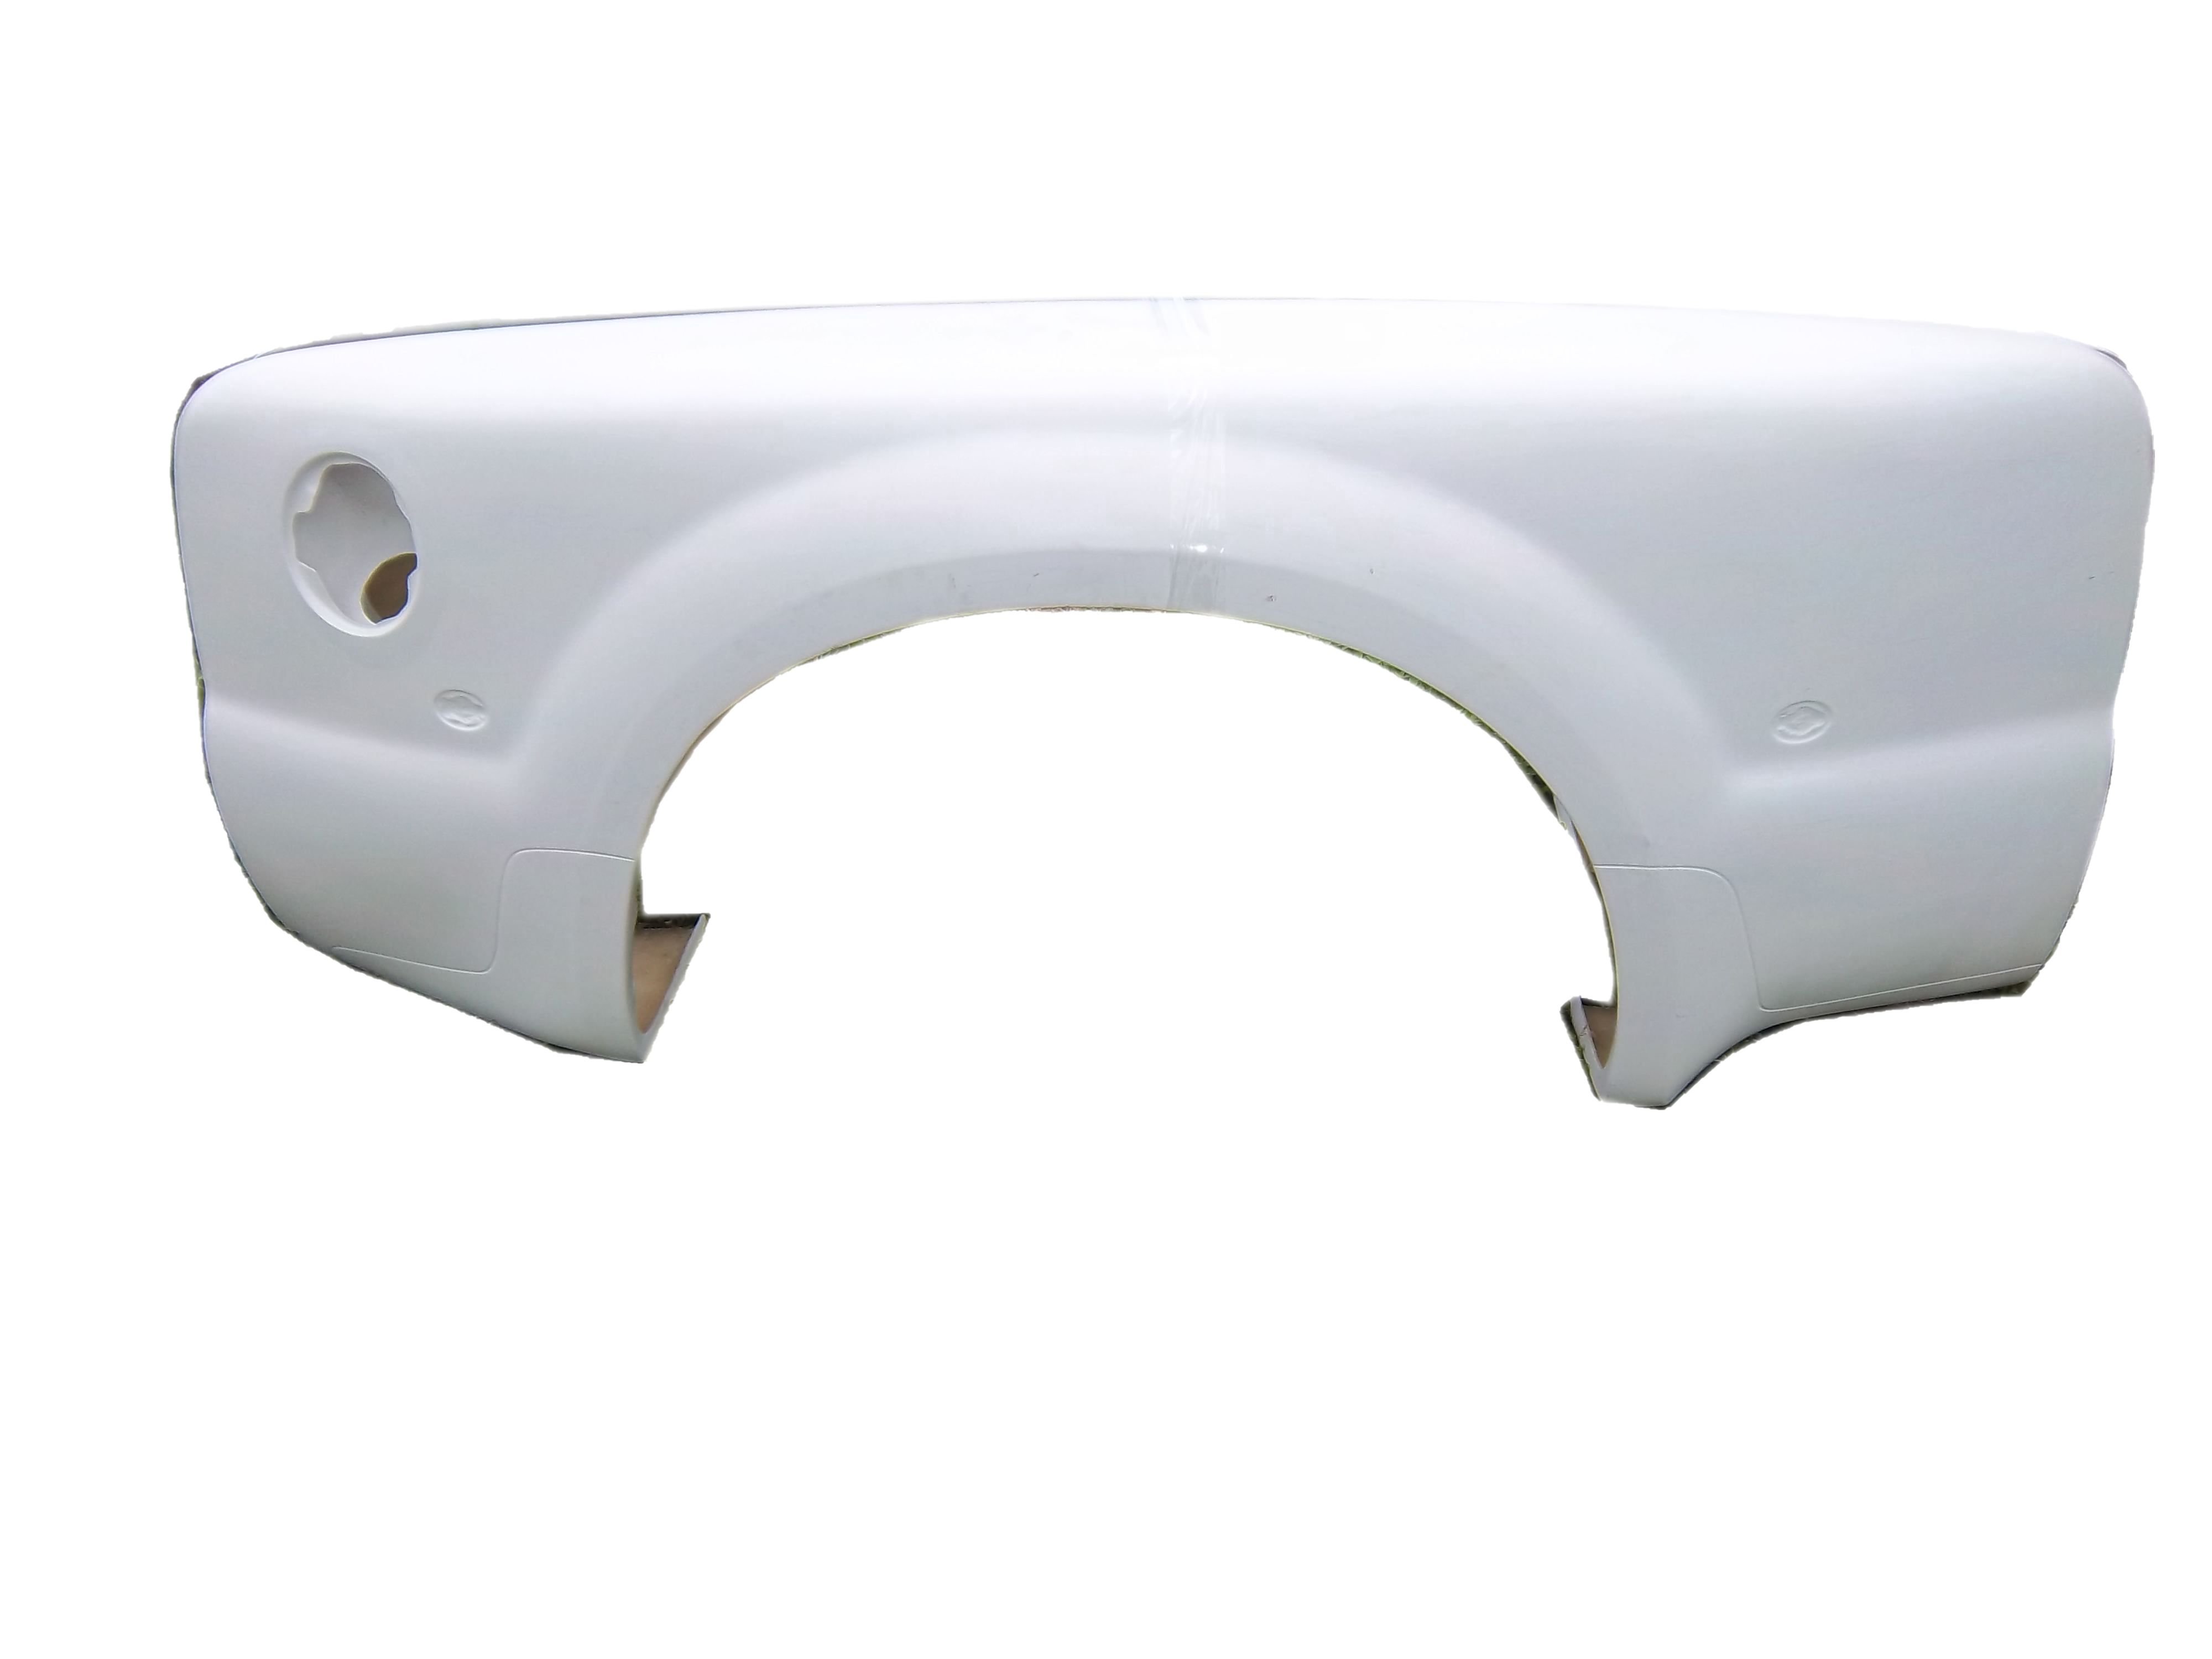 ford f350 dually fenders short bed 1998-2010 oem replacement able for conversion 
1999,2000,2001,2002,2003,2004,2005,2009,2010